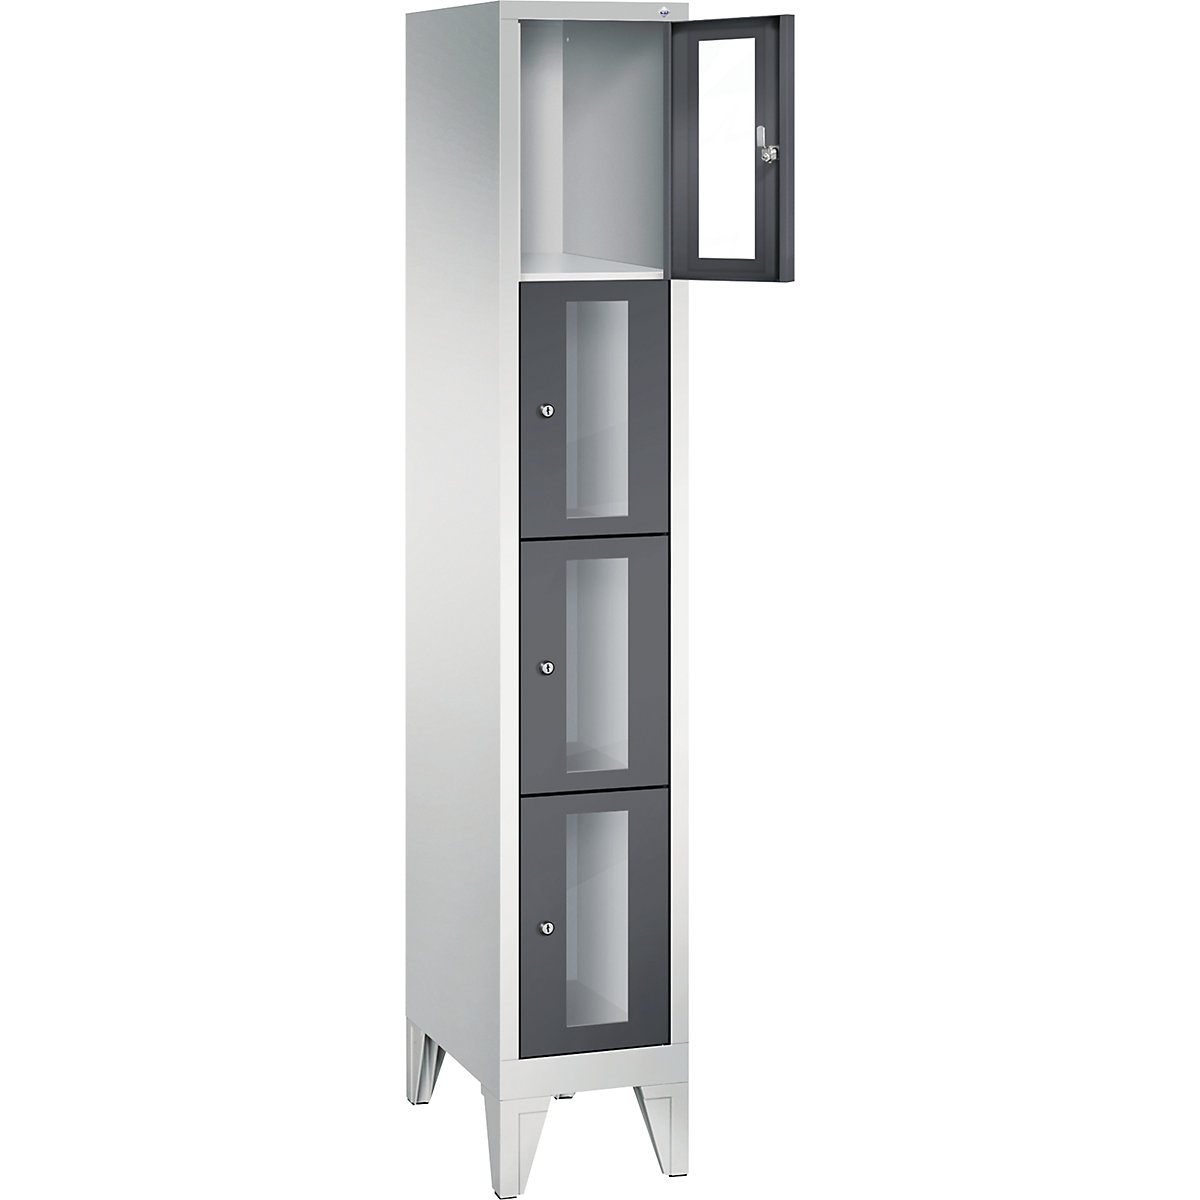 C+P – CLASSIC locker unit, compartment height 375 mm, with feet, 4 compartments, width 320 mm, black grey door